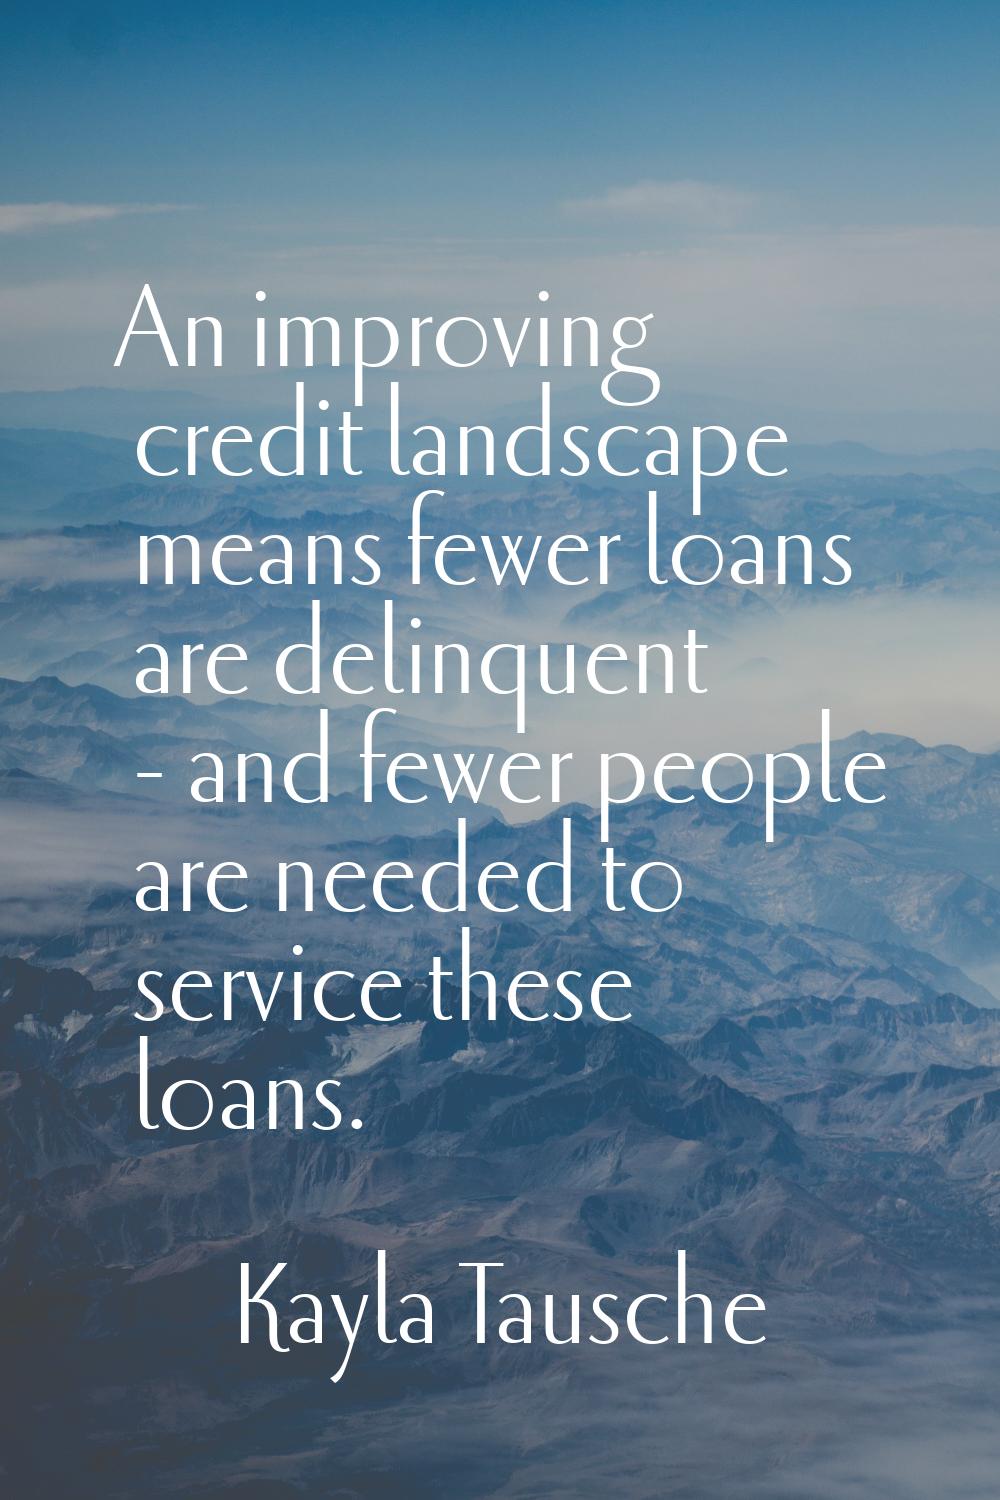 An improving credit landscape means fewer loans are delinquent - and fewer people are needed to ser